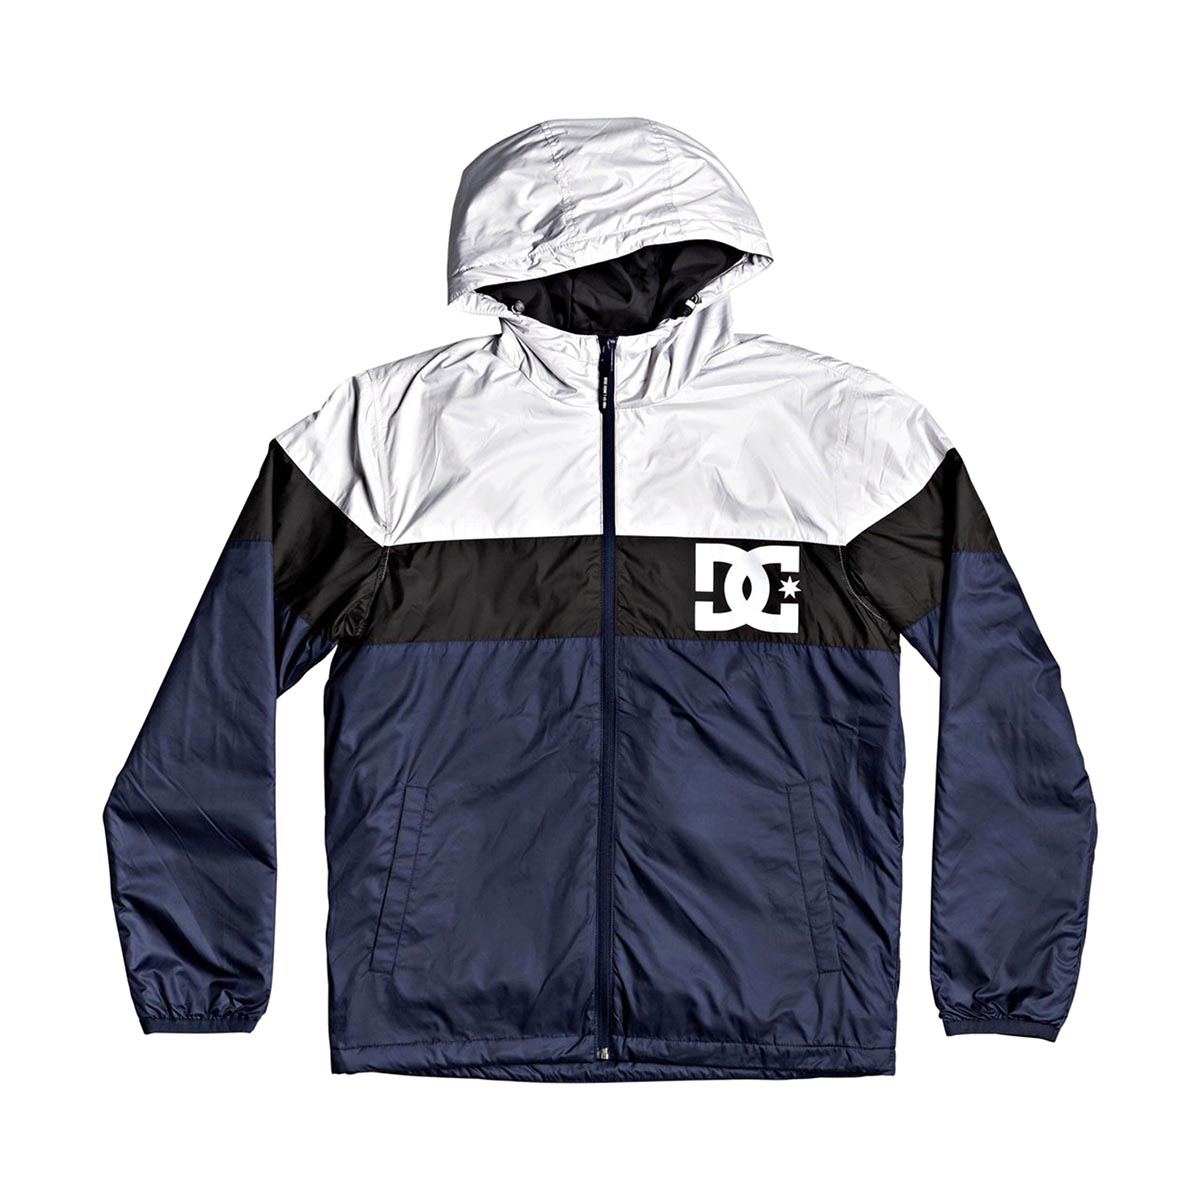 DC - MISSILE PADDED WATER-RESISTANT INSULATED WINDBREAKER